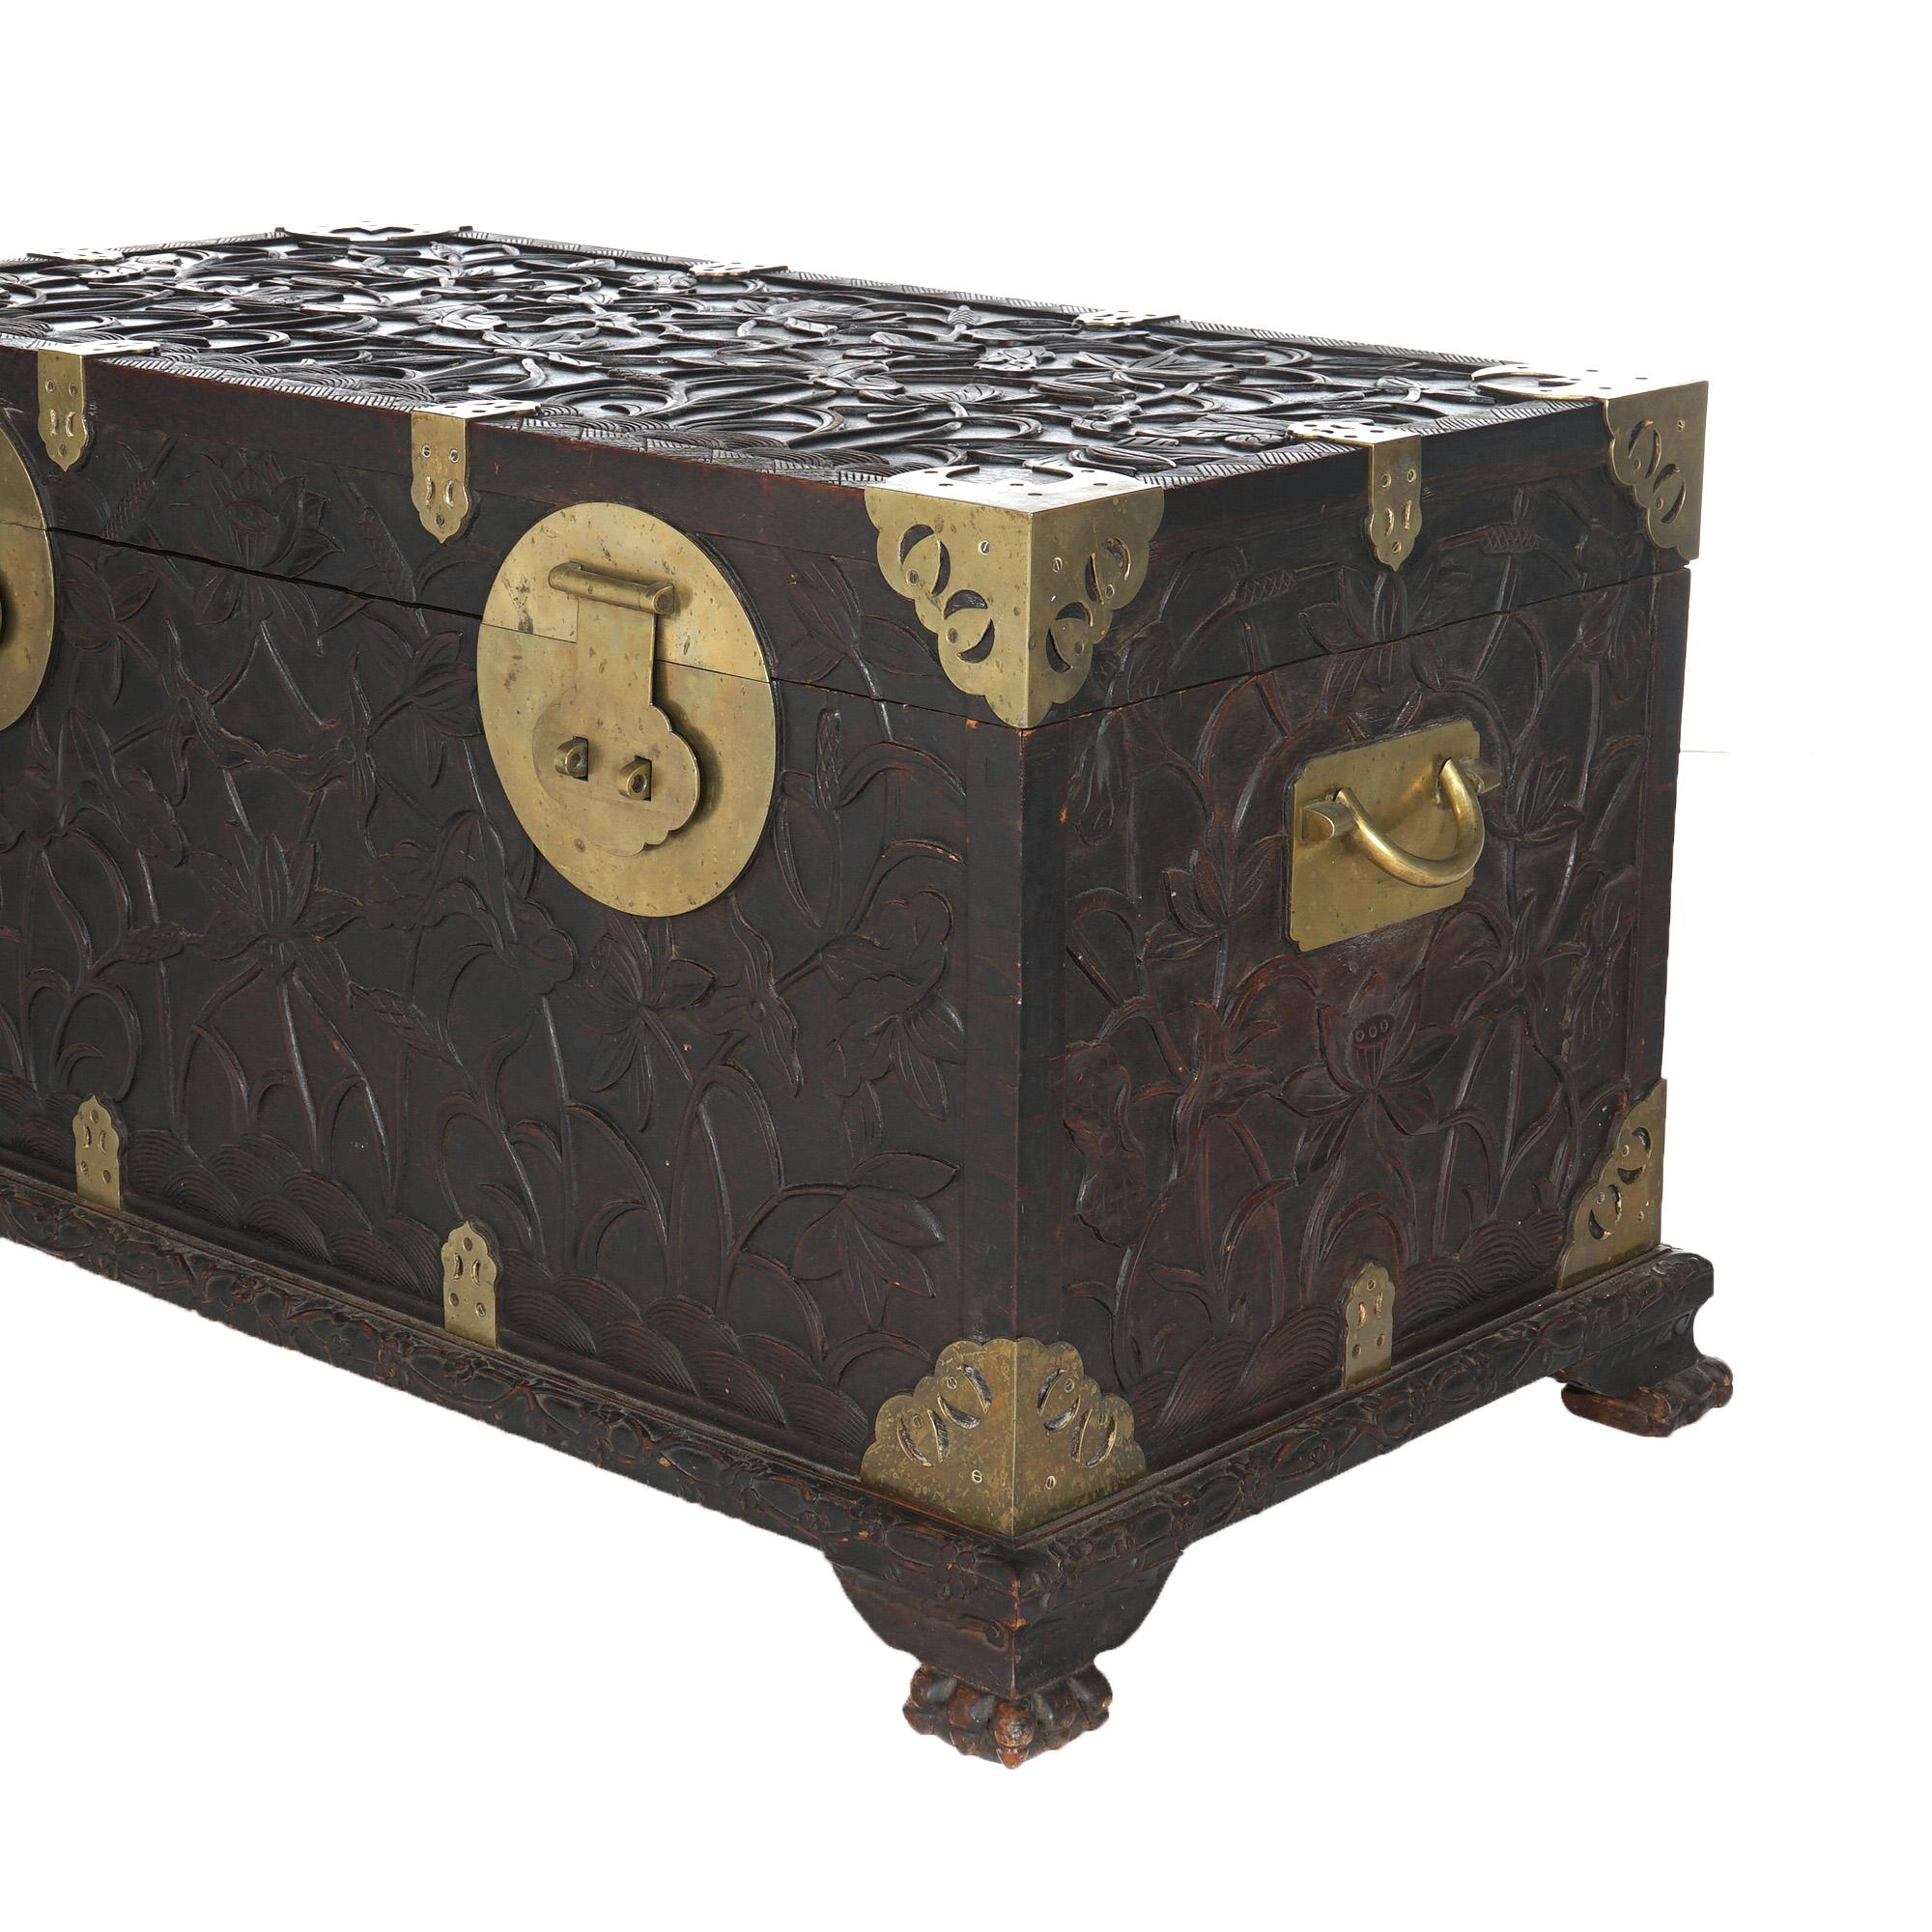 Antique Chinese Blanket Wedding Chest Carved in Relief with Floral Design C1890 For Sale 5